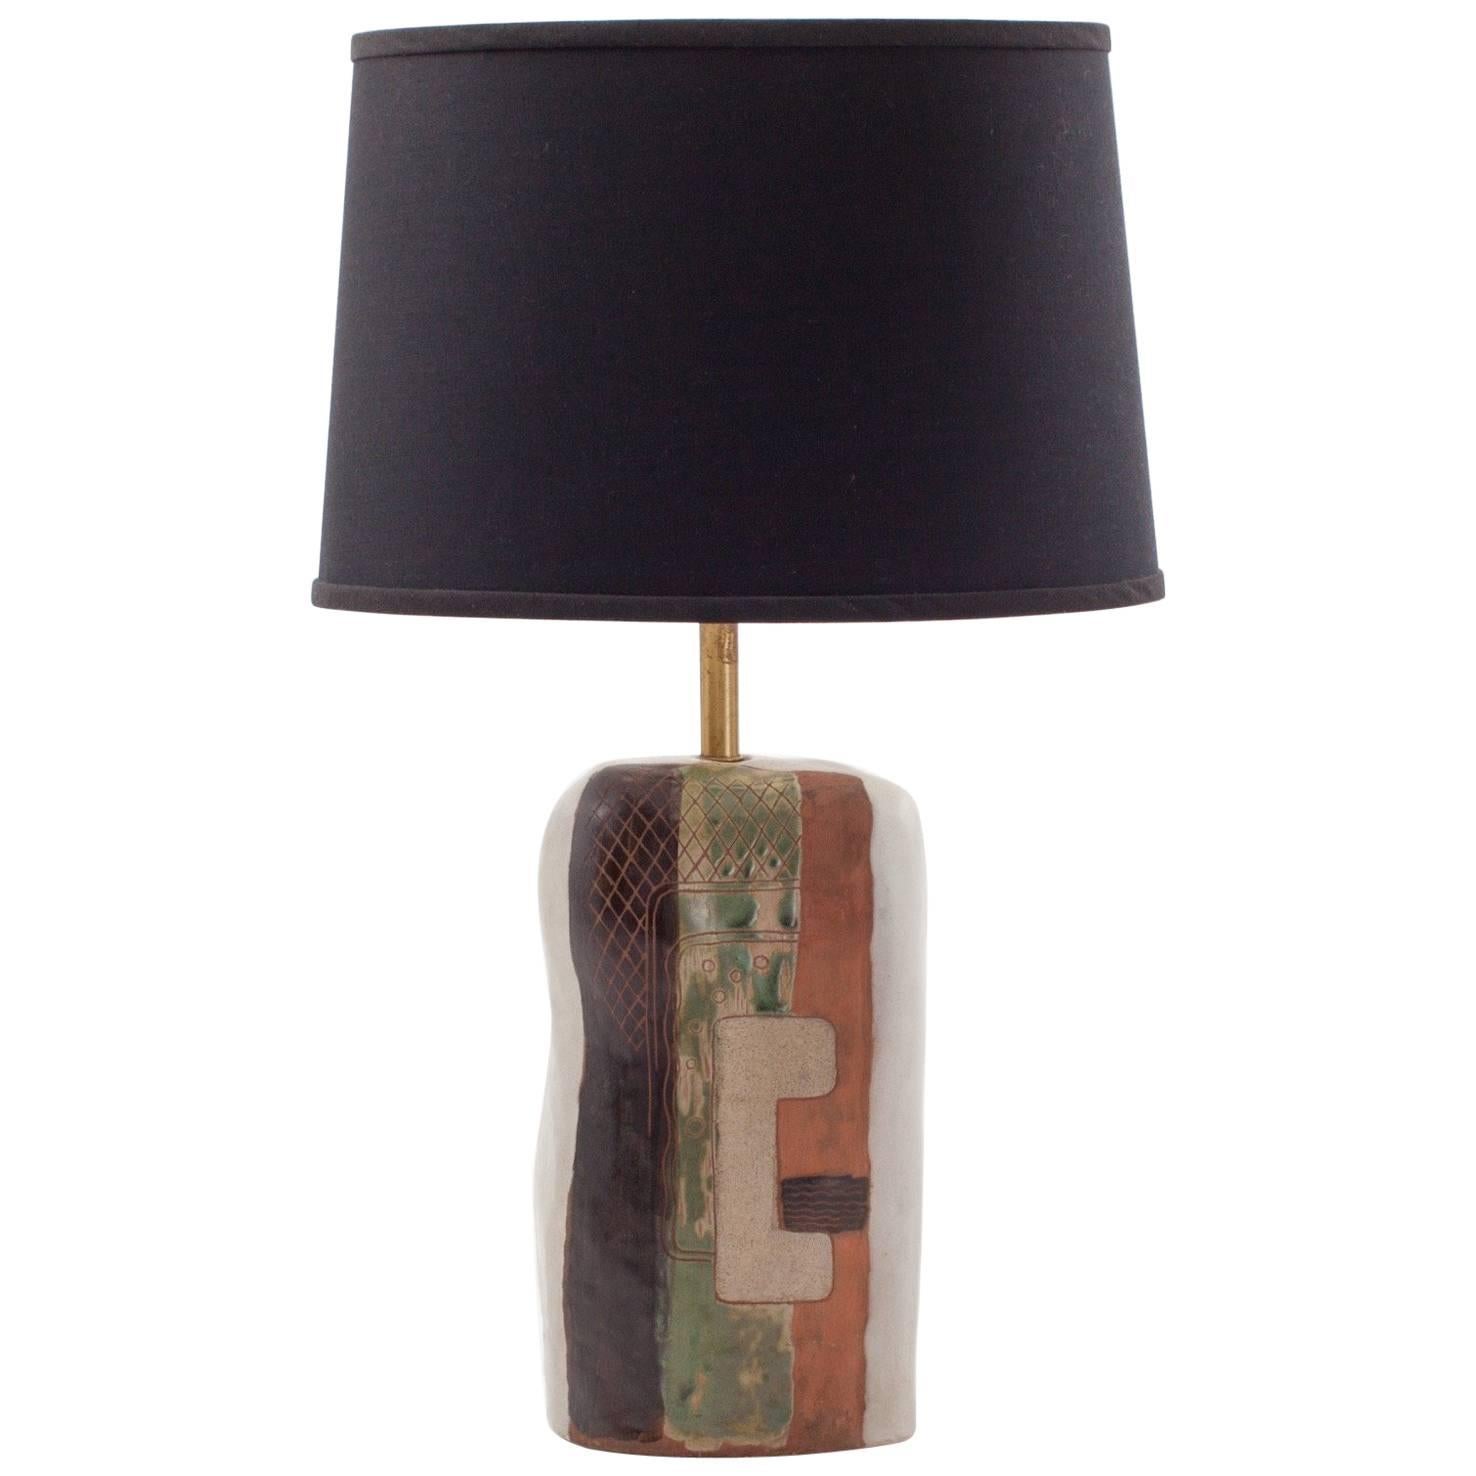 Cubist Ceramic Table Lamp with Abstract Design by Marianna von Allesch, 1950's